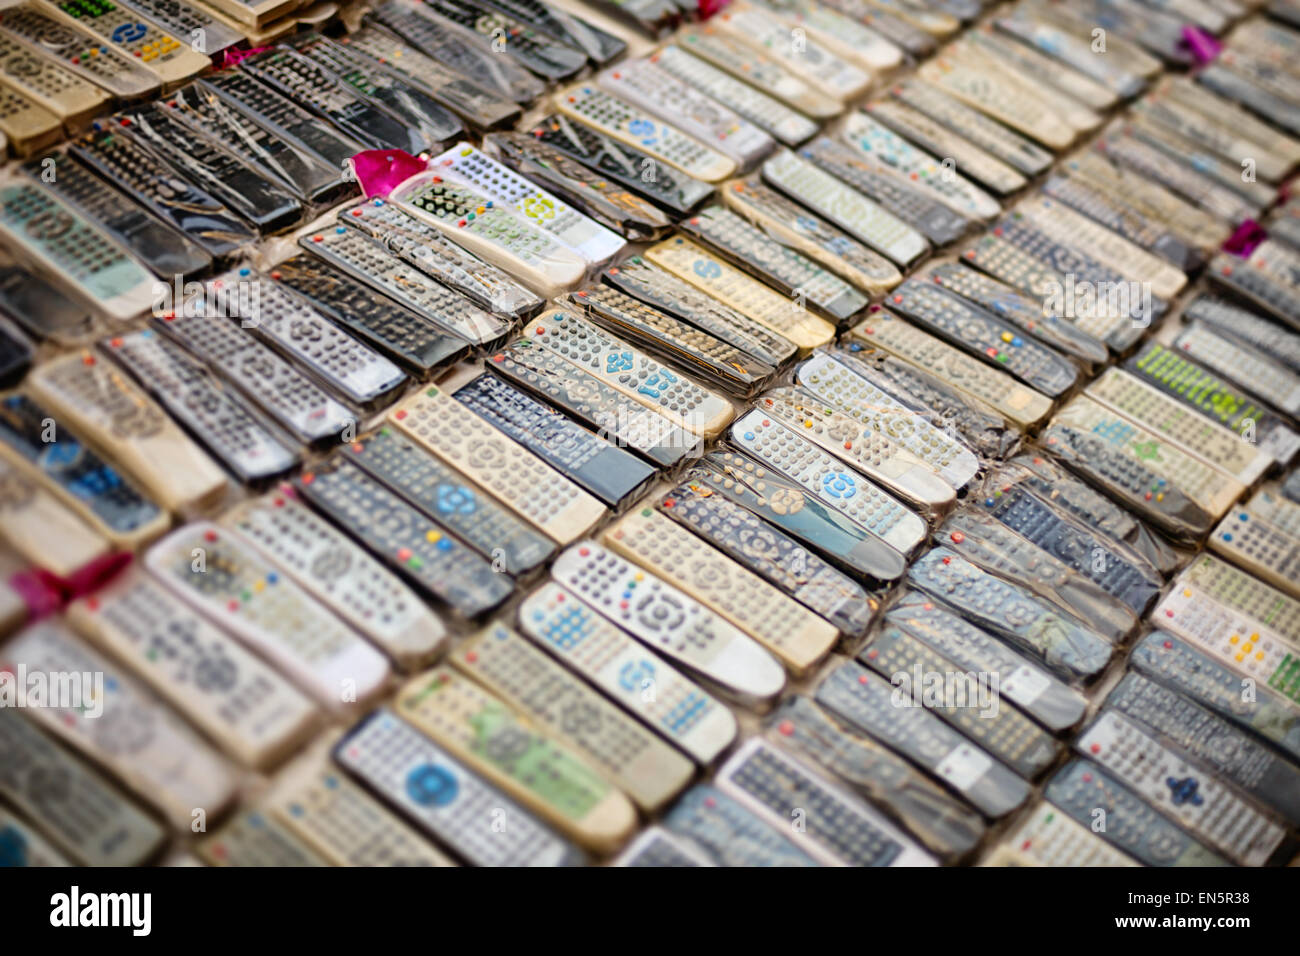 Dozens of second-hand remote control wands from a wide array of electronic devices displayed for sale at a vendor's stand in Sin Stock Photo